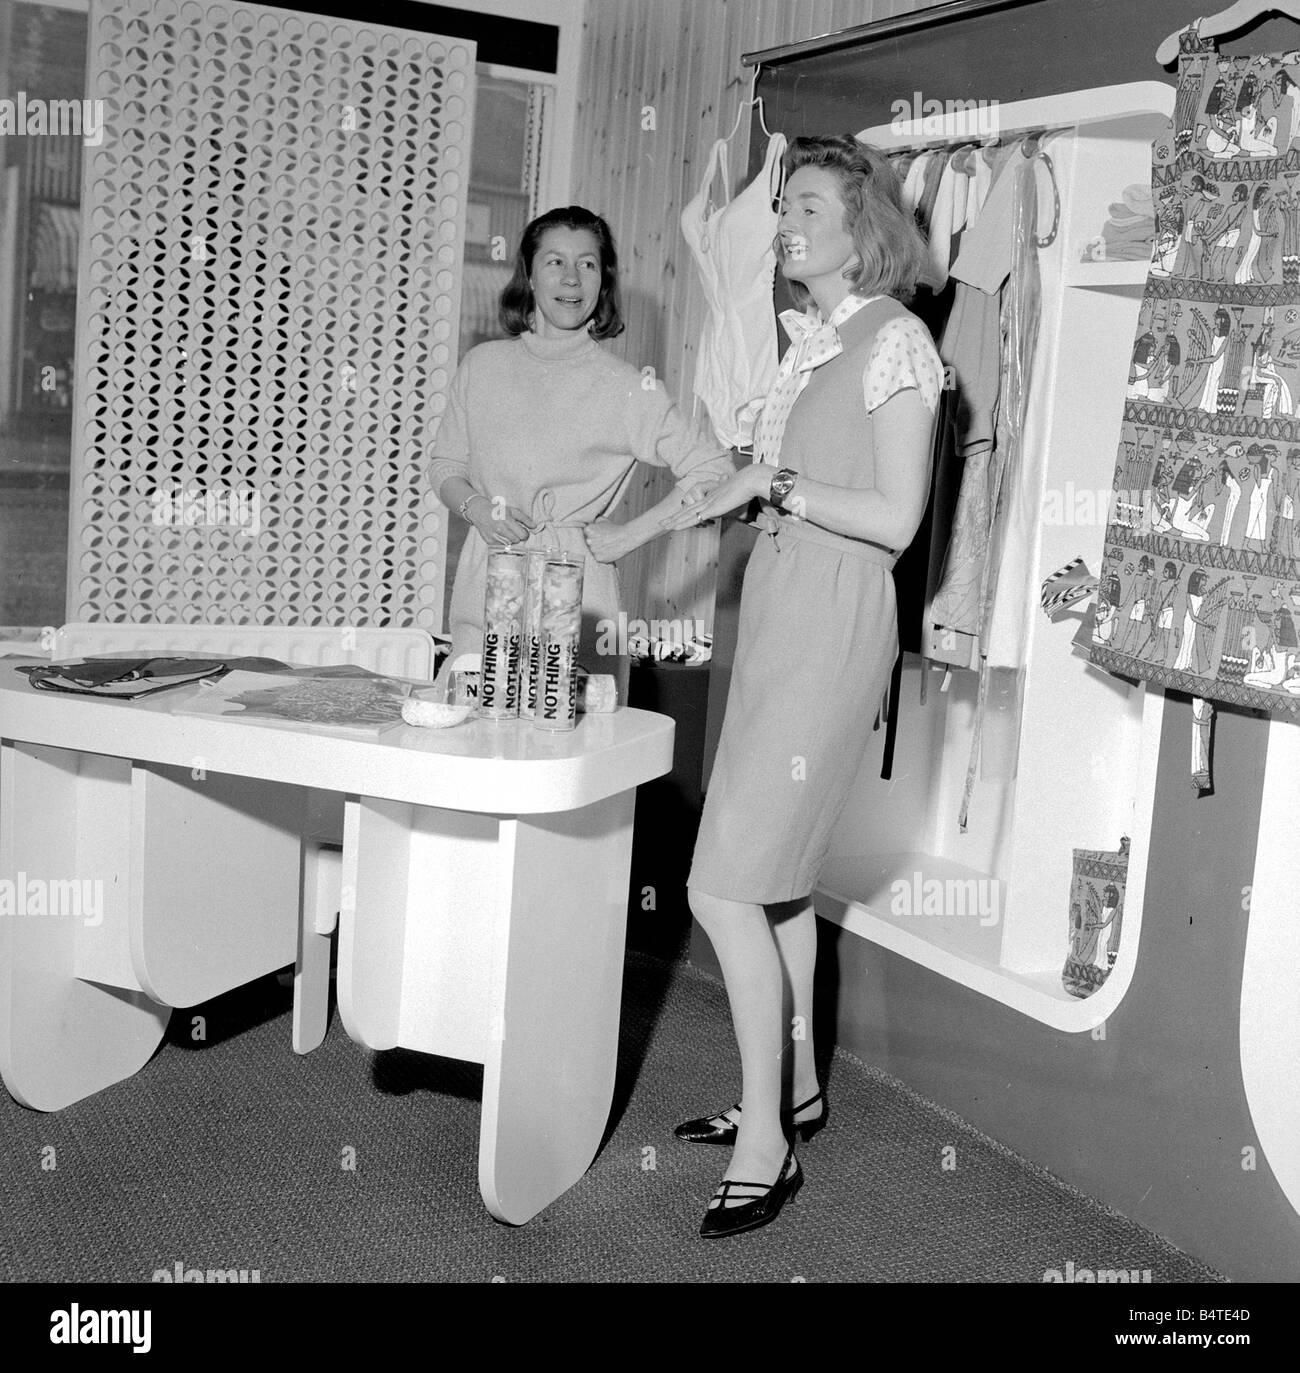 Lady Aitken wife of Sir Max Aitken has opened a boutique at 69 pimlico Road called Sea and Ski specialising in clothes for these sports April 1966 Stock Photo